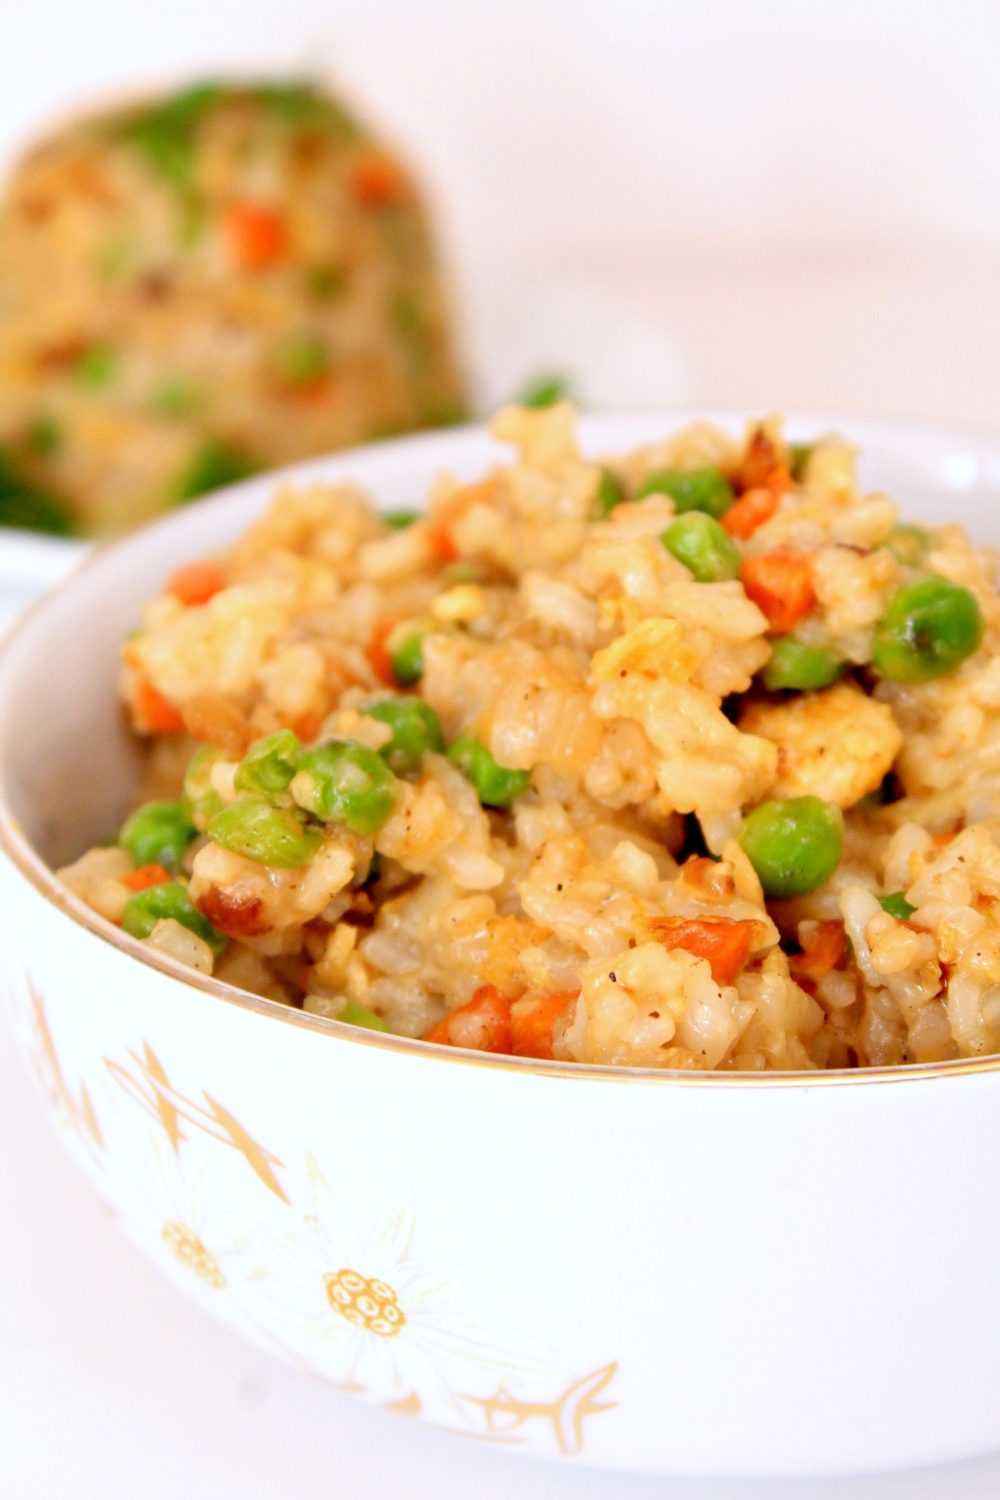 Image of vegetable egg fried rice recipe in a white bowl